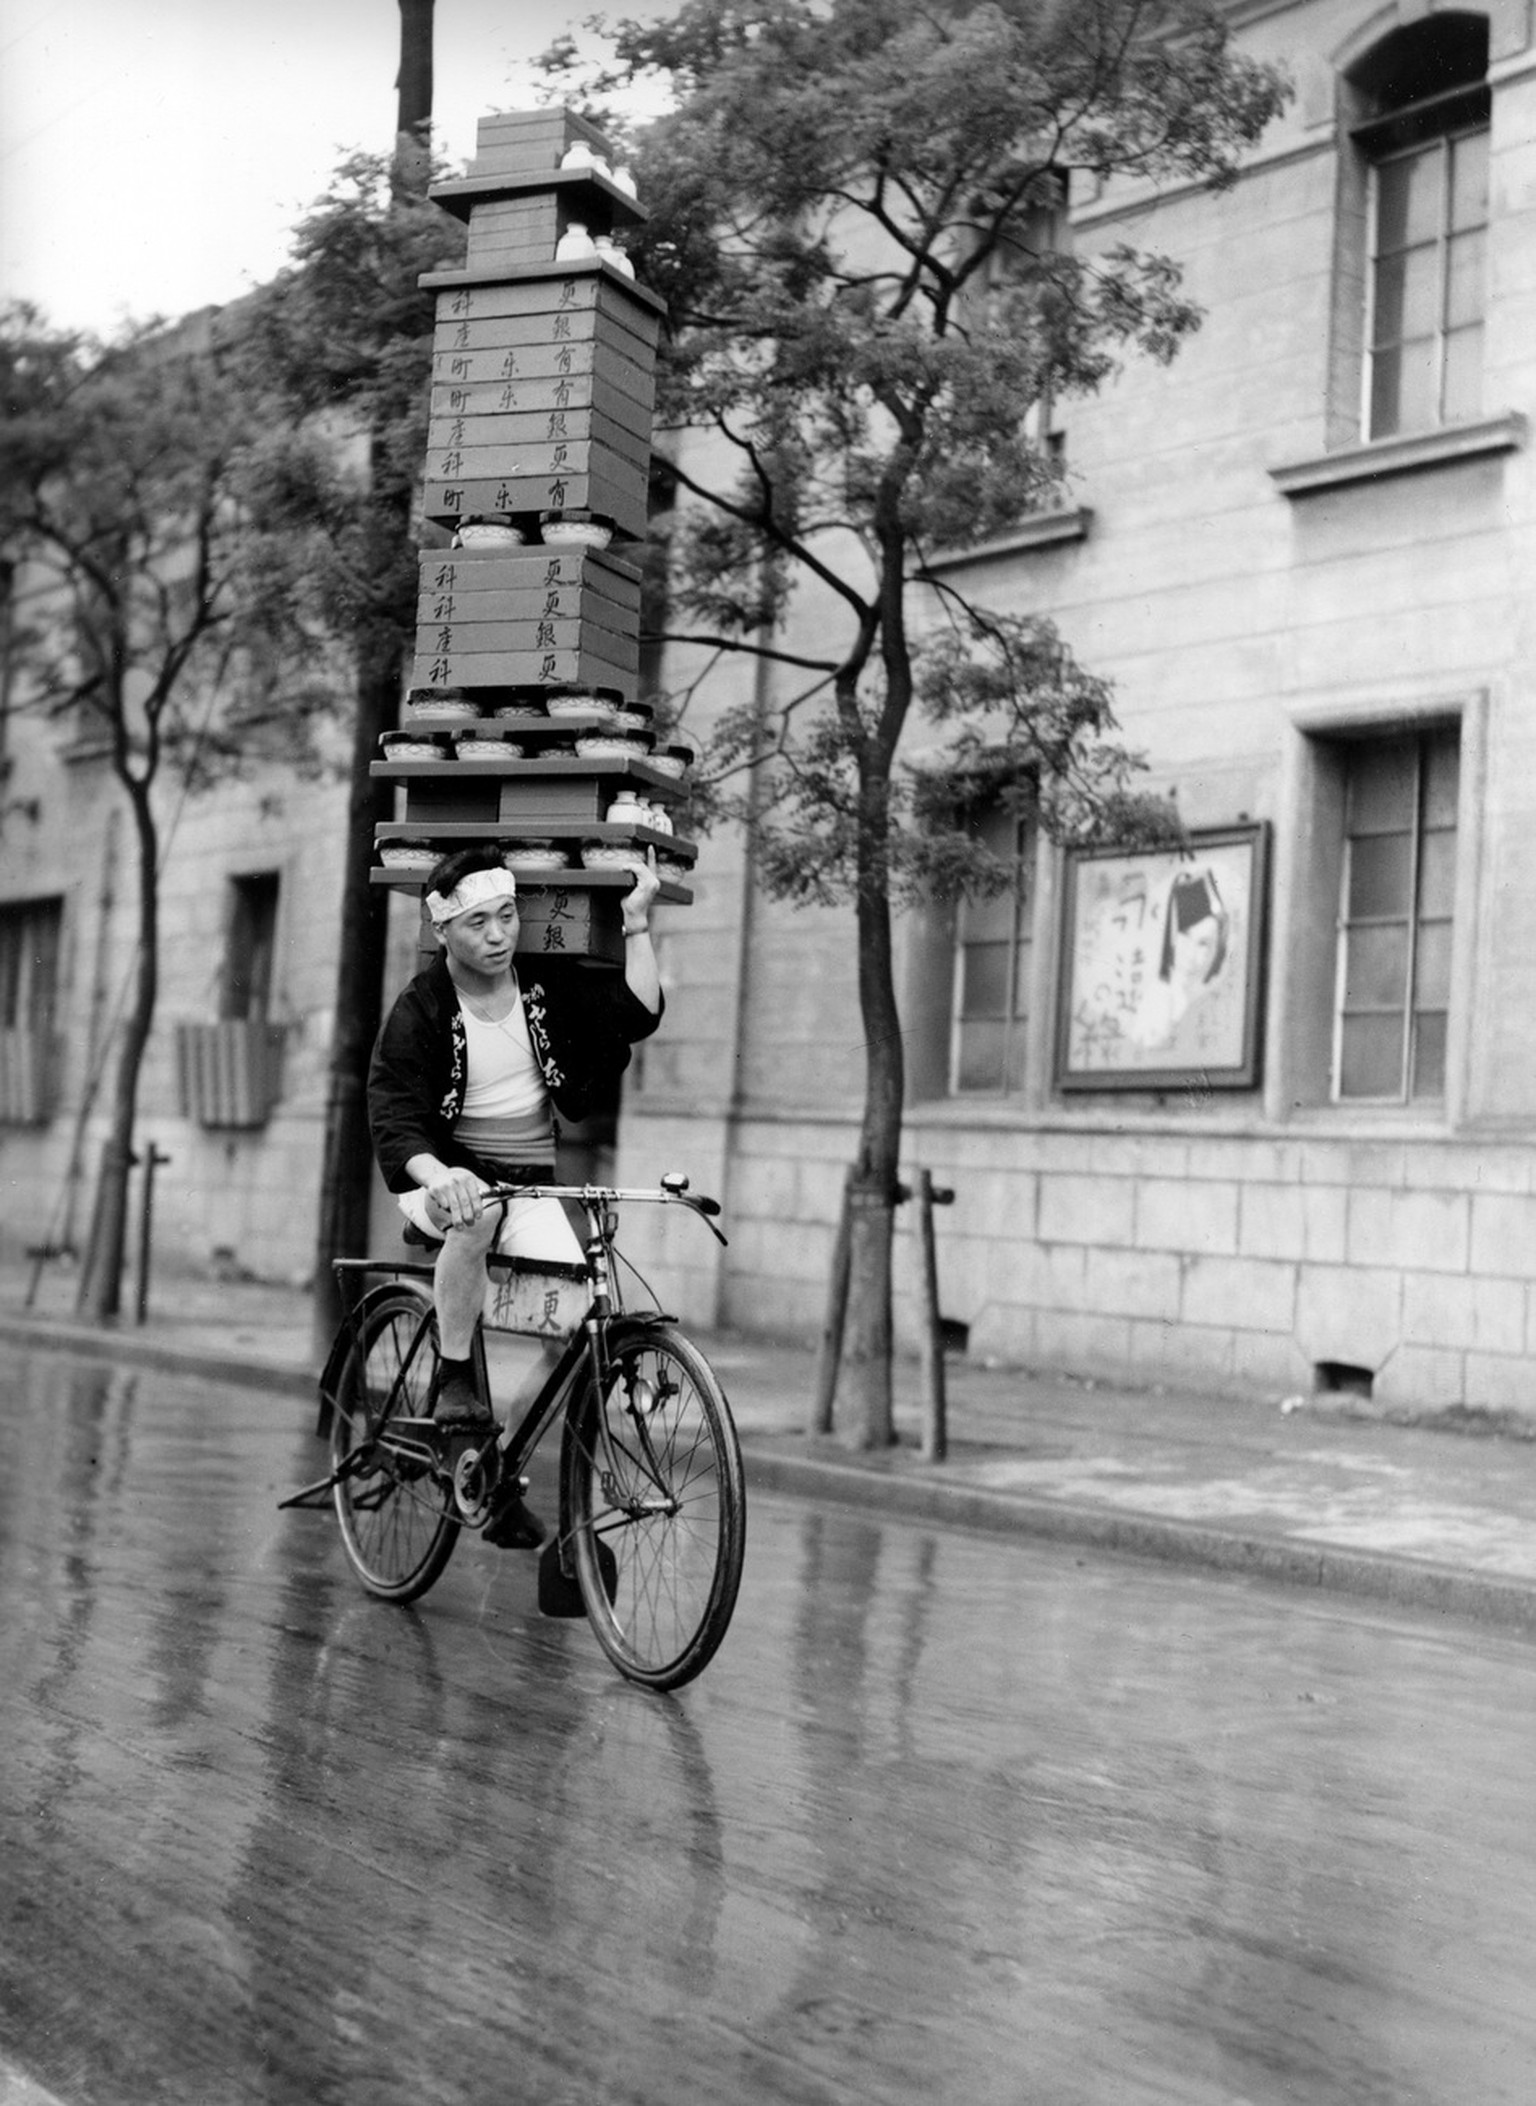 A delivery man for a Tokyo restaurant maneuvers his bicycle as he balances on his shoulder a high stack of trays containing soba bowls through a street in Japan on March 8, 1937. (AP Photo)